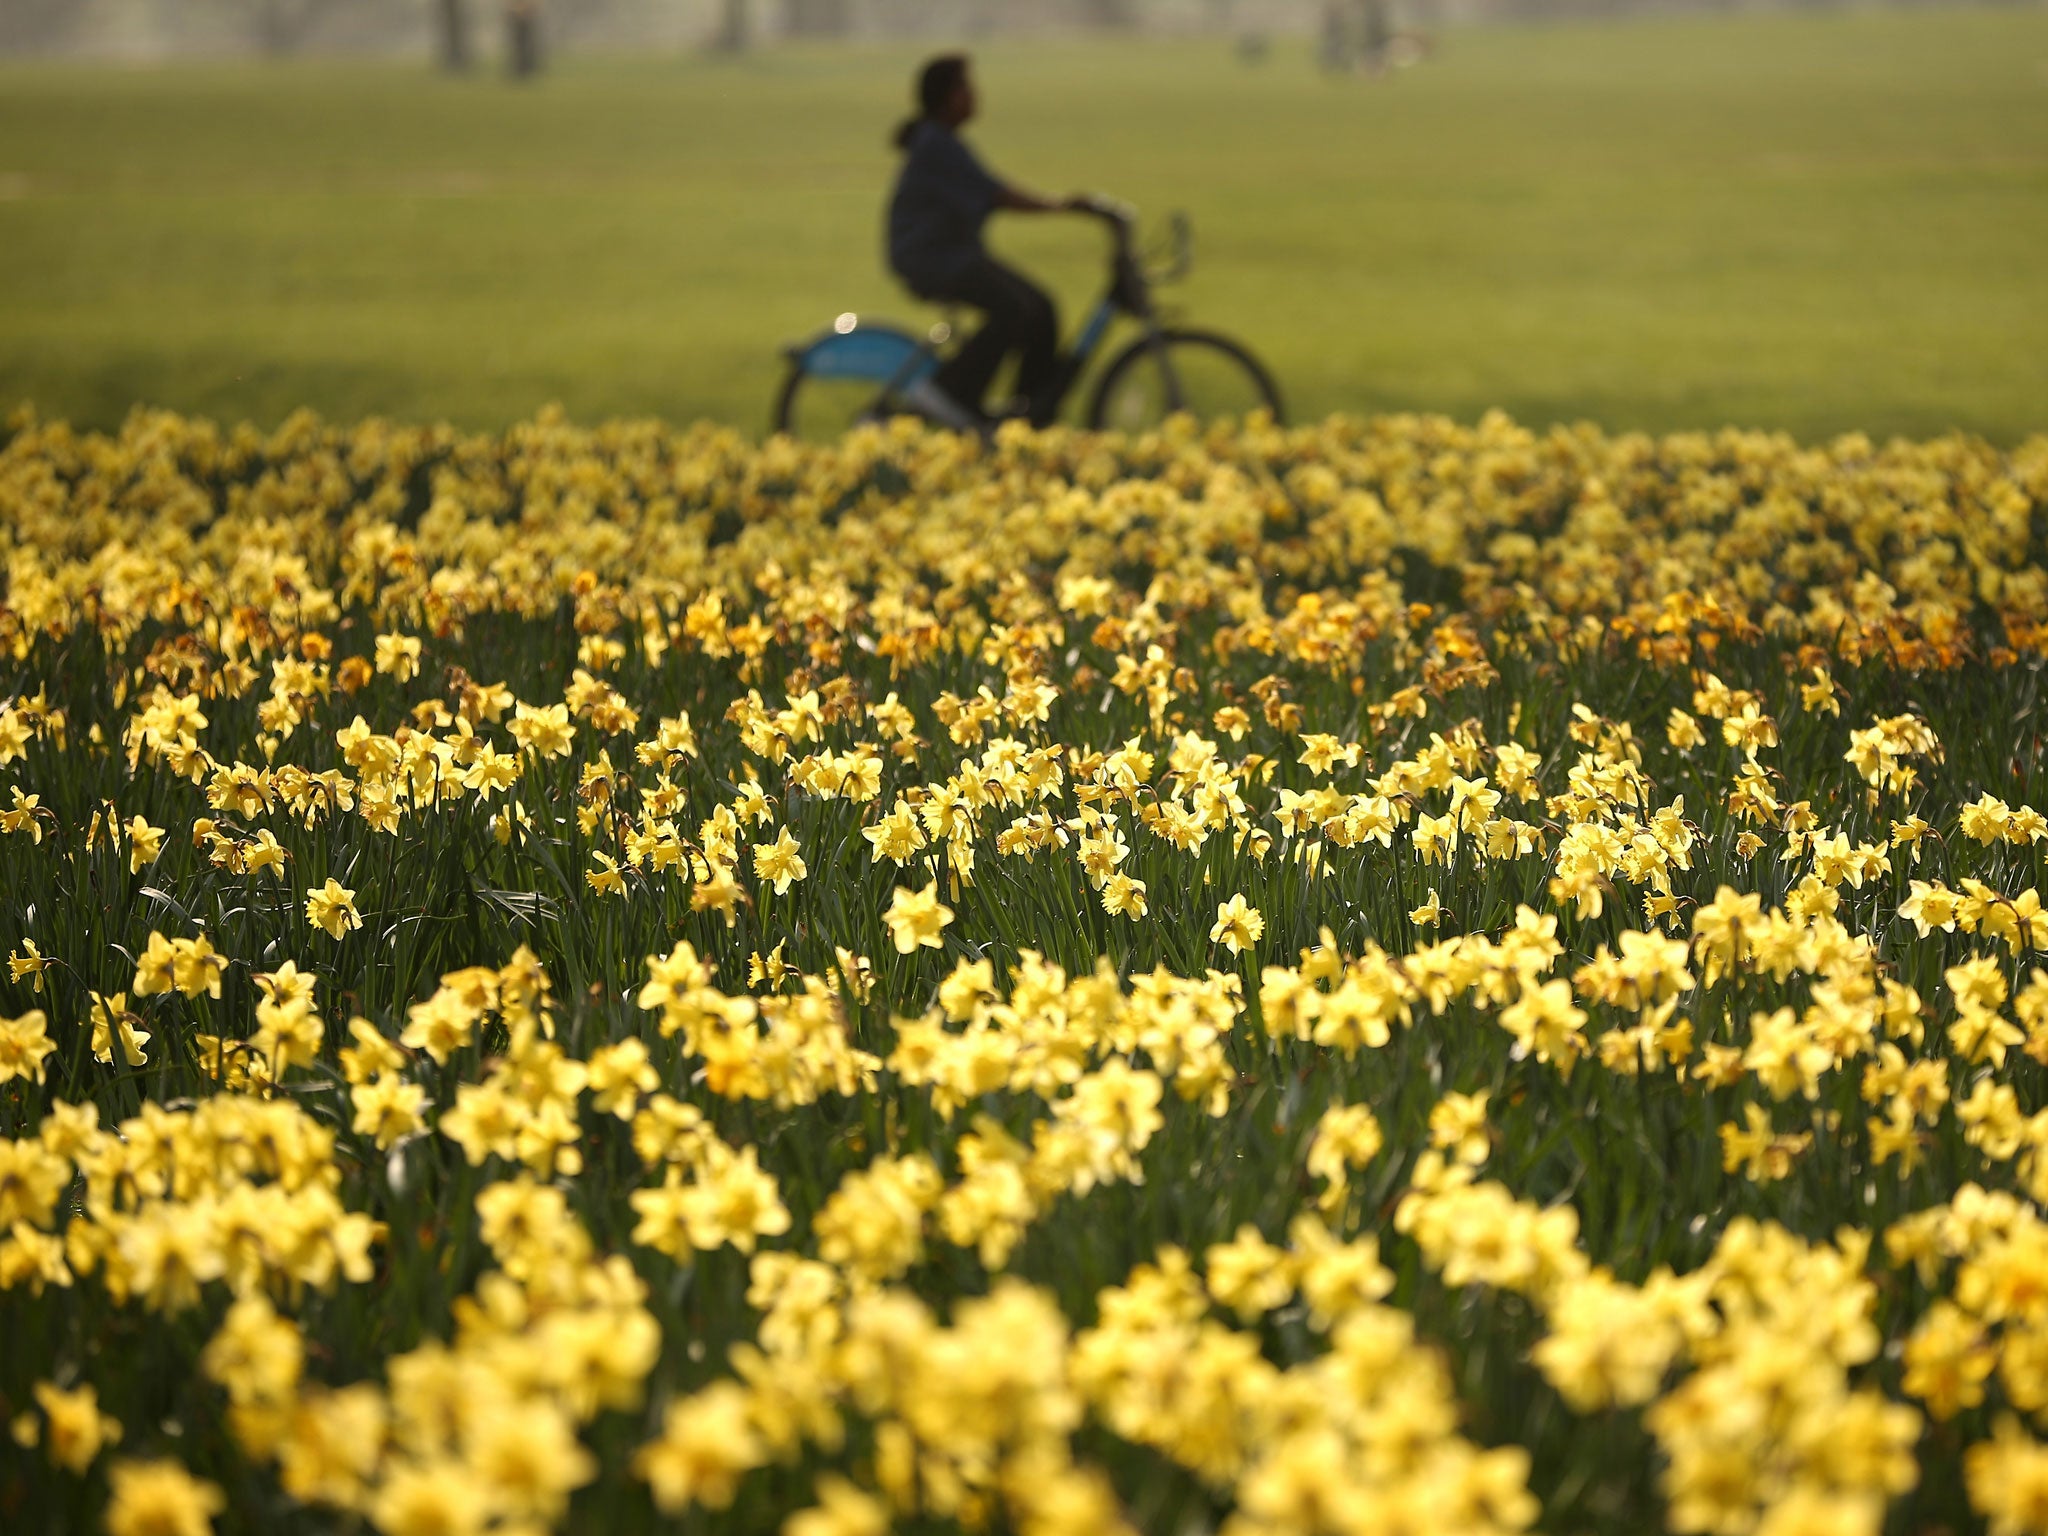 A cyclist passes a bank of daffodils in the spring sunshine in Hyde Park